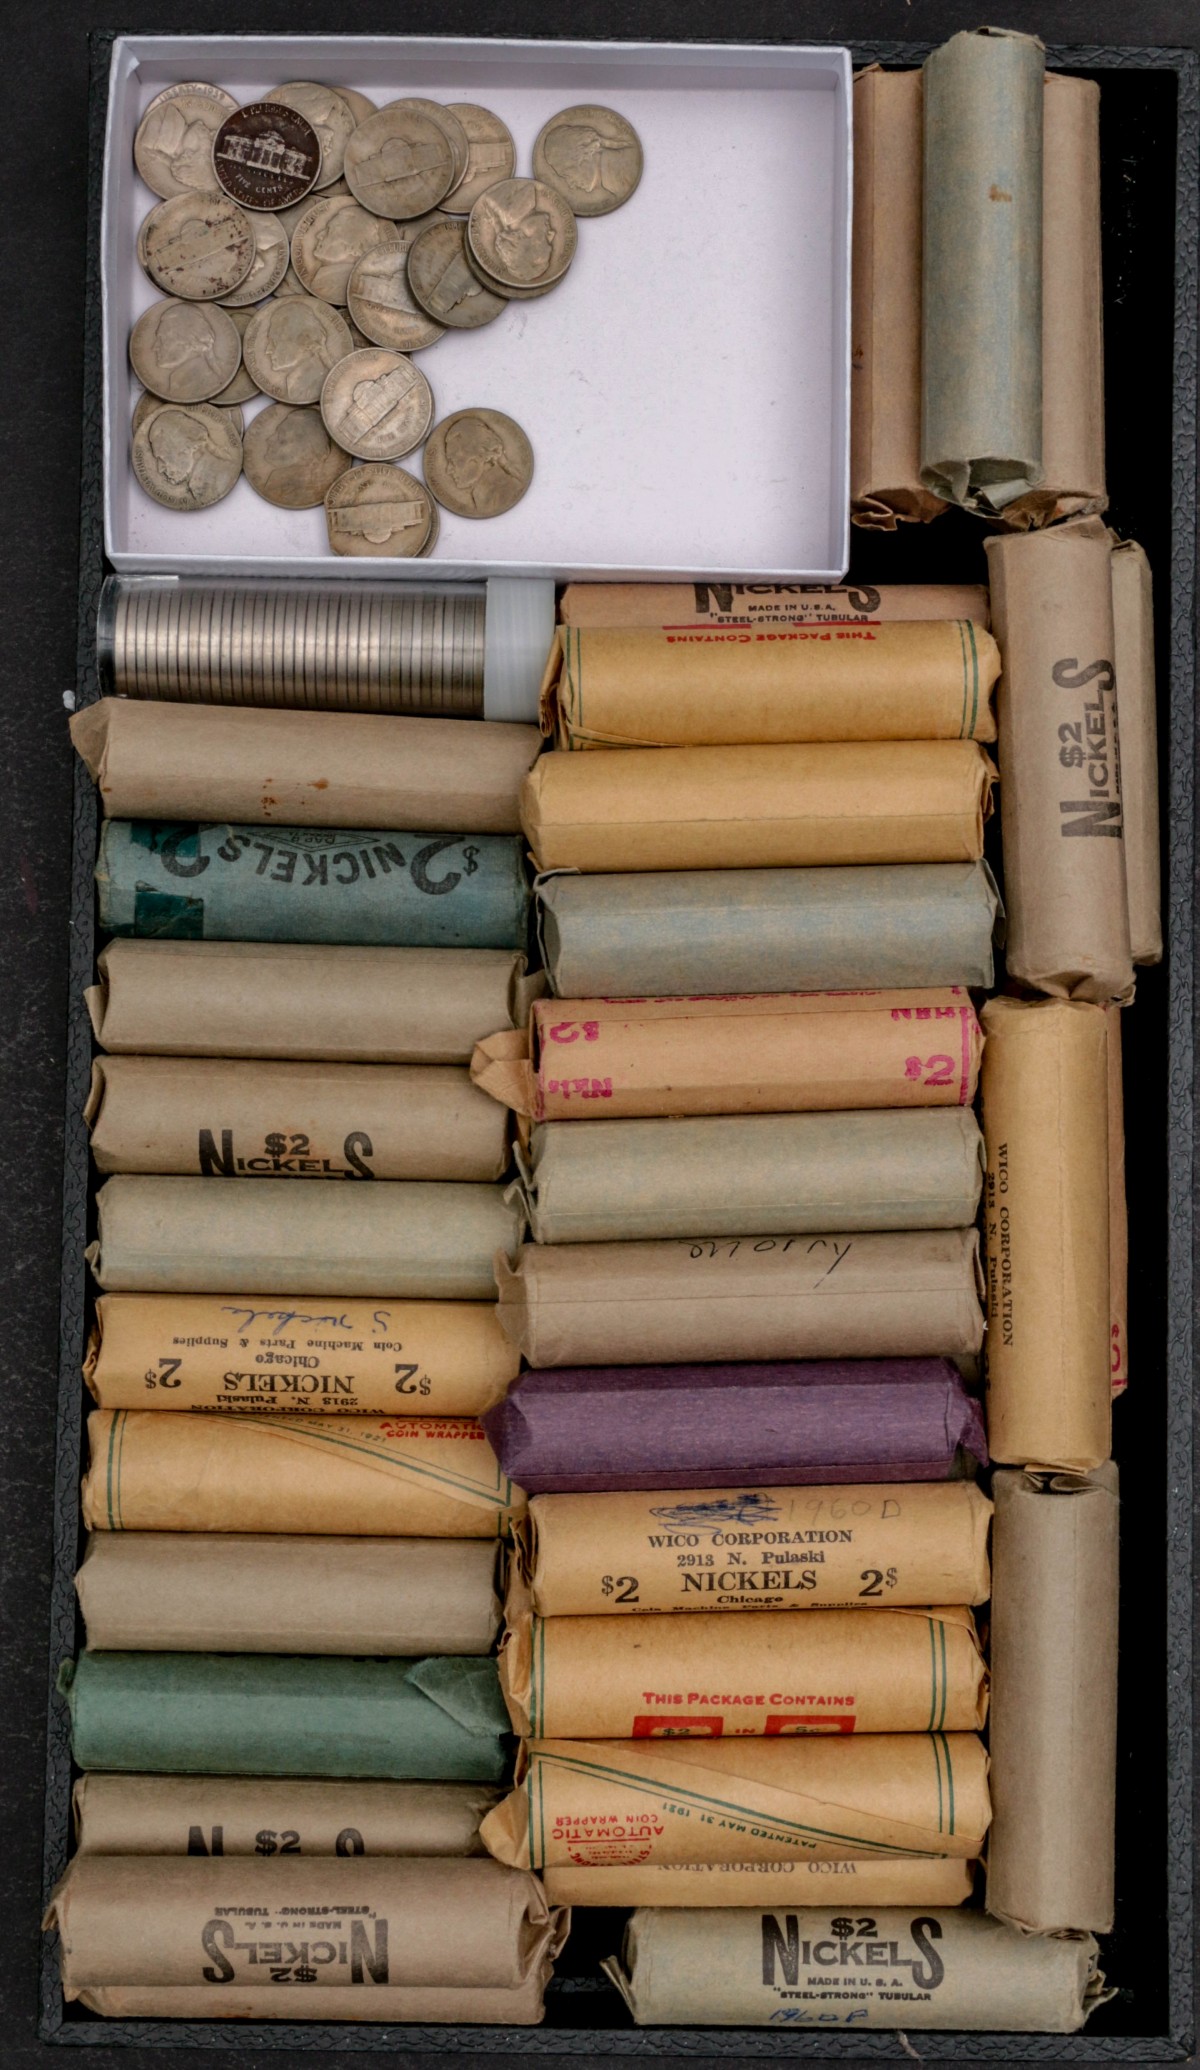 20 POUNDS OF UNSORTED ROLLED U.S. JEFFERSON NICKELS